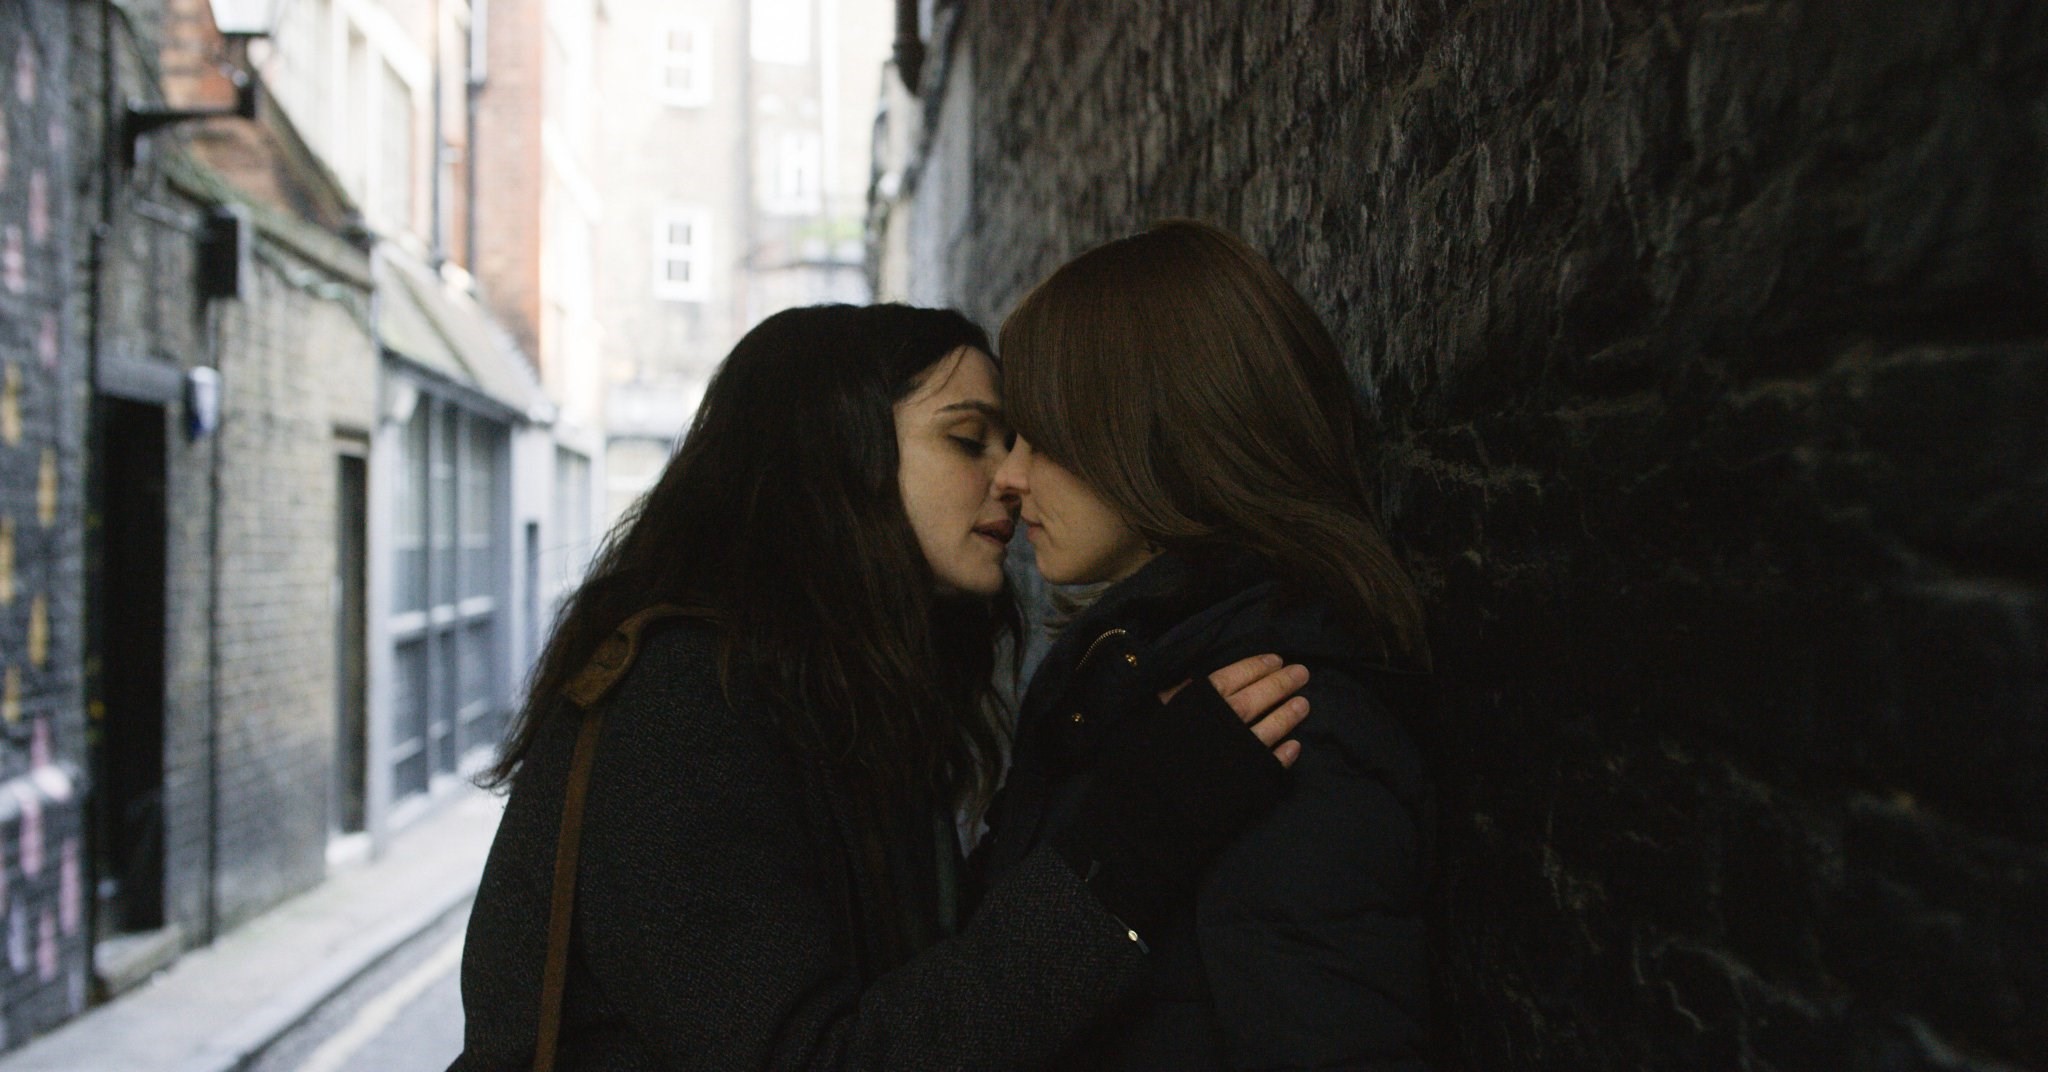 Hasidic Jewish Women - This Film is a Tale of Lesbian Love in the Orthodox Jewish Community |  AnOther